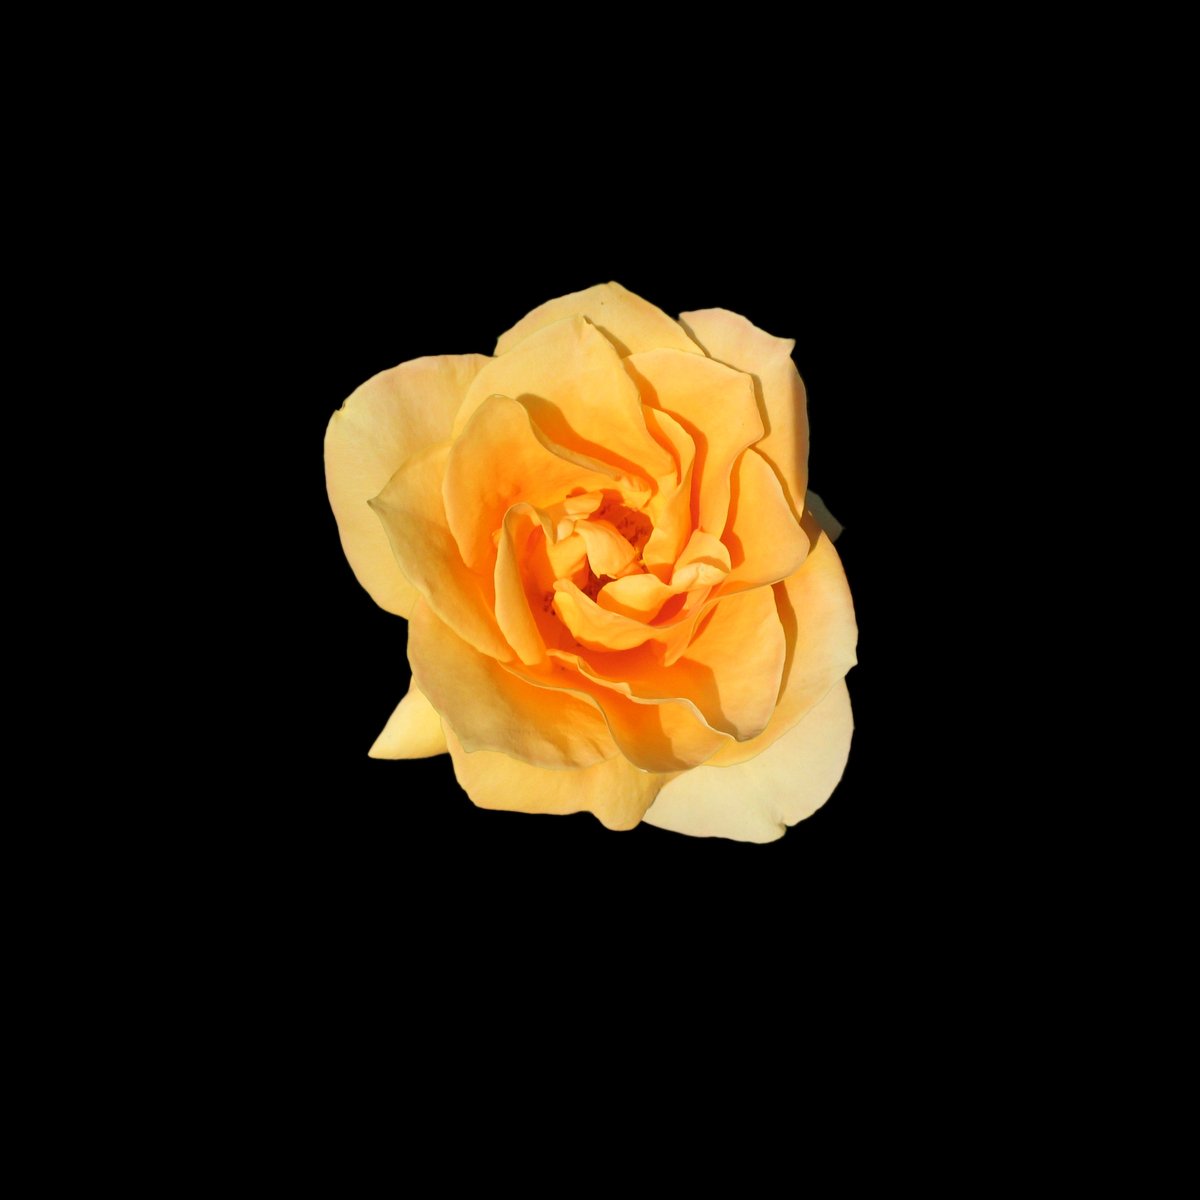 a yellow rose in full bloom on a black background